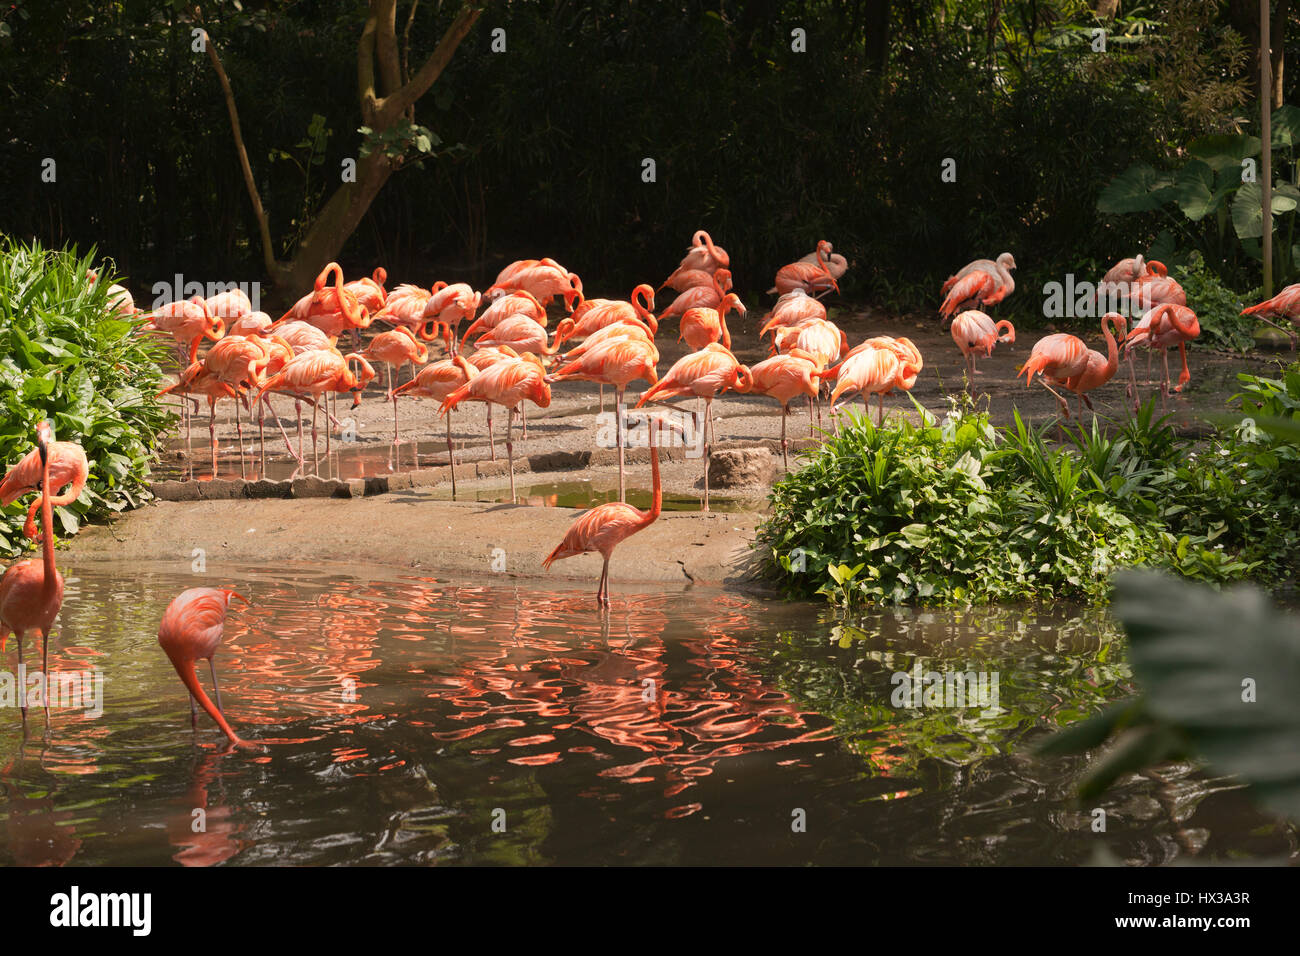 Large group of pink flamingos walking around on the riverside at daytime drinking water in the sun. Stock Photo